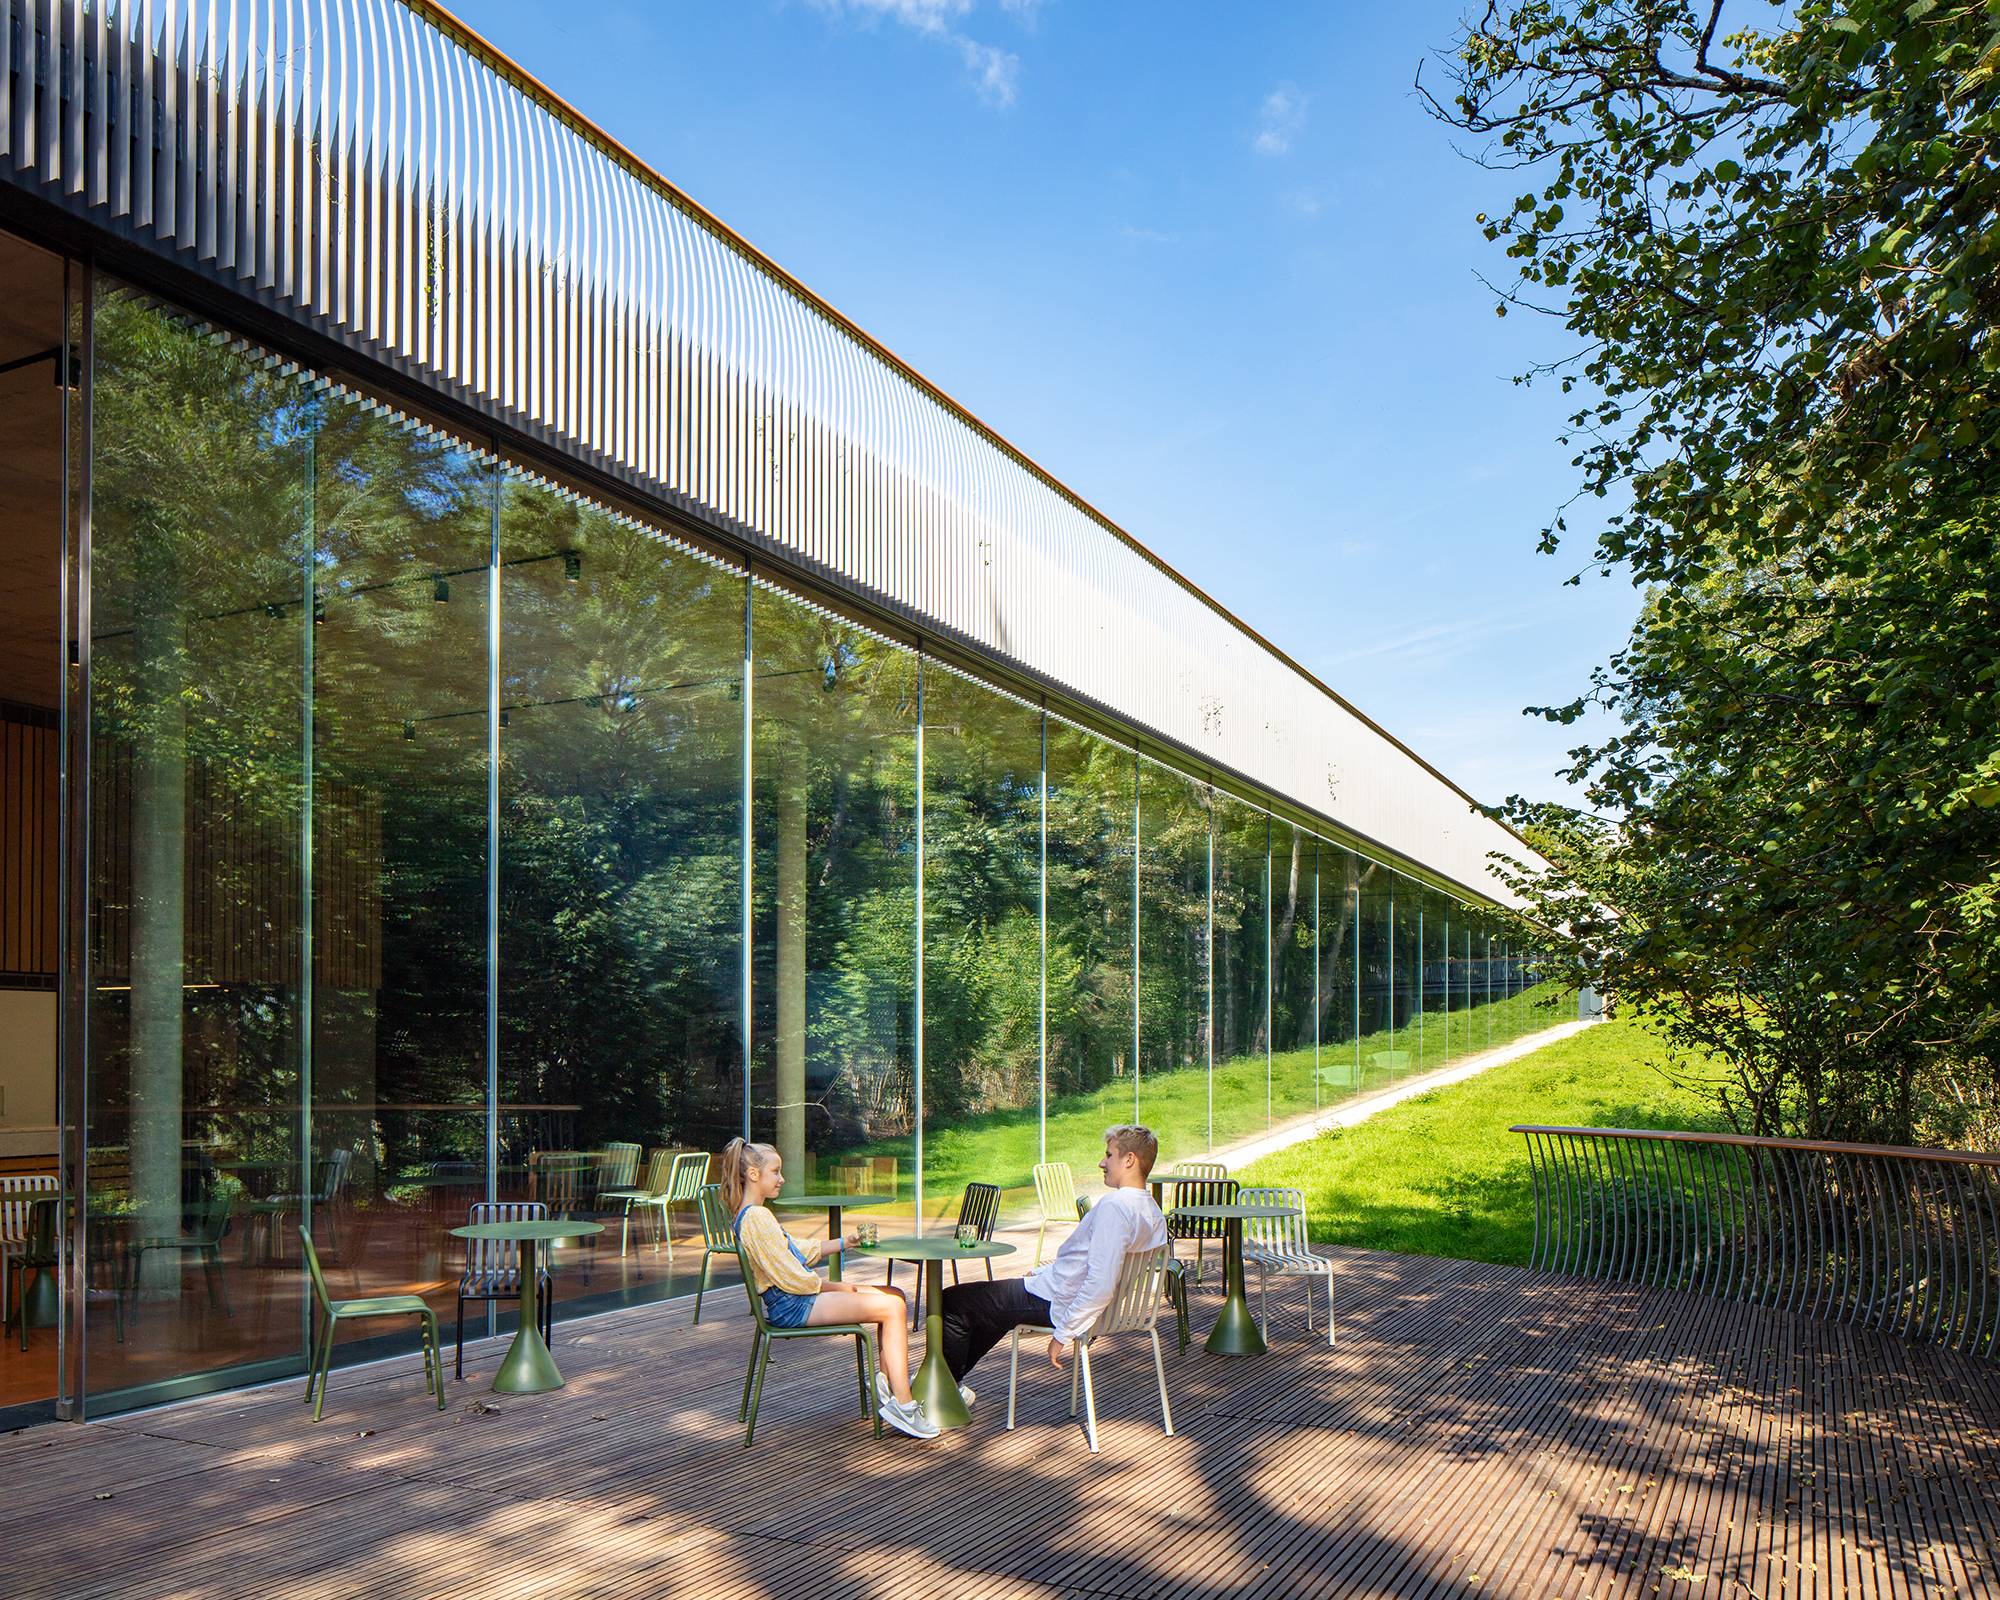 The Story of Gardening Museum (Somerset) by Stonewood Design with Mark Thomas Architects and Henry Fagan Engineering. Photo: Craig Auckland